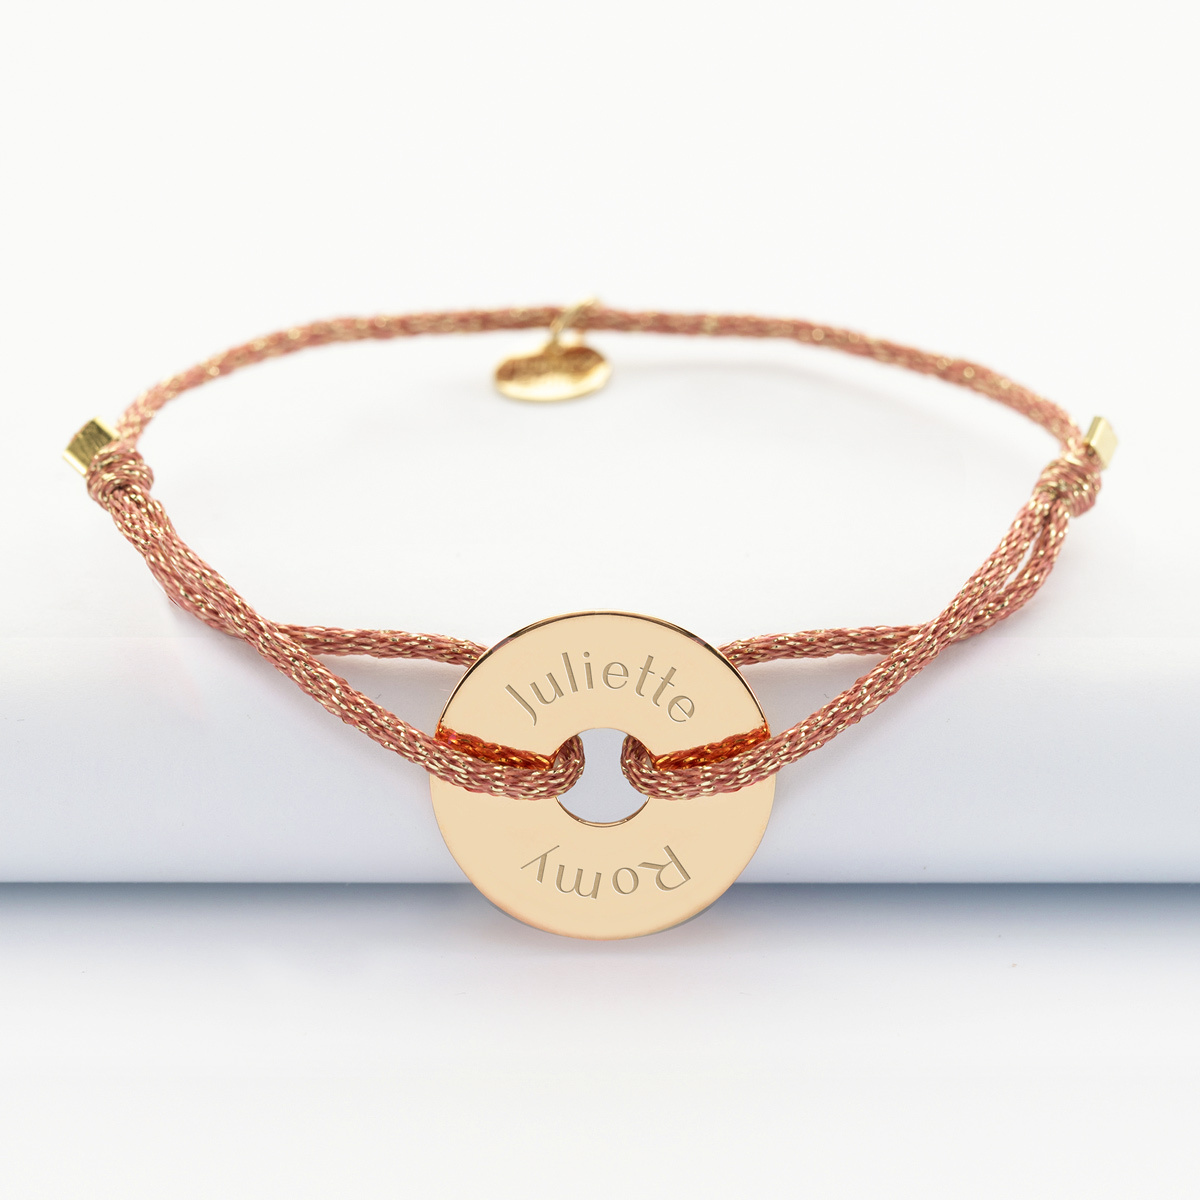 Sparkly cord bracelet with personalised engraved gold plated open disc 20mm